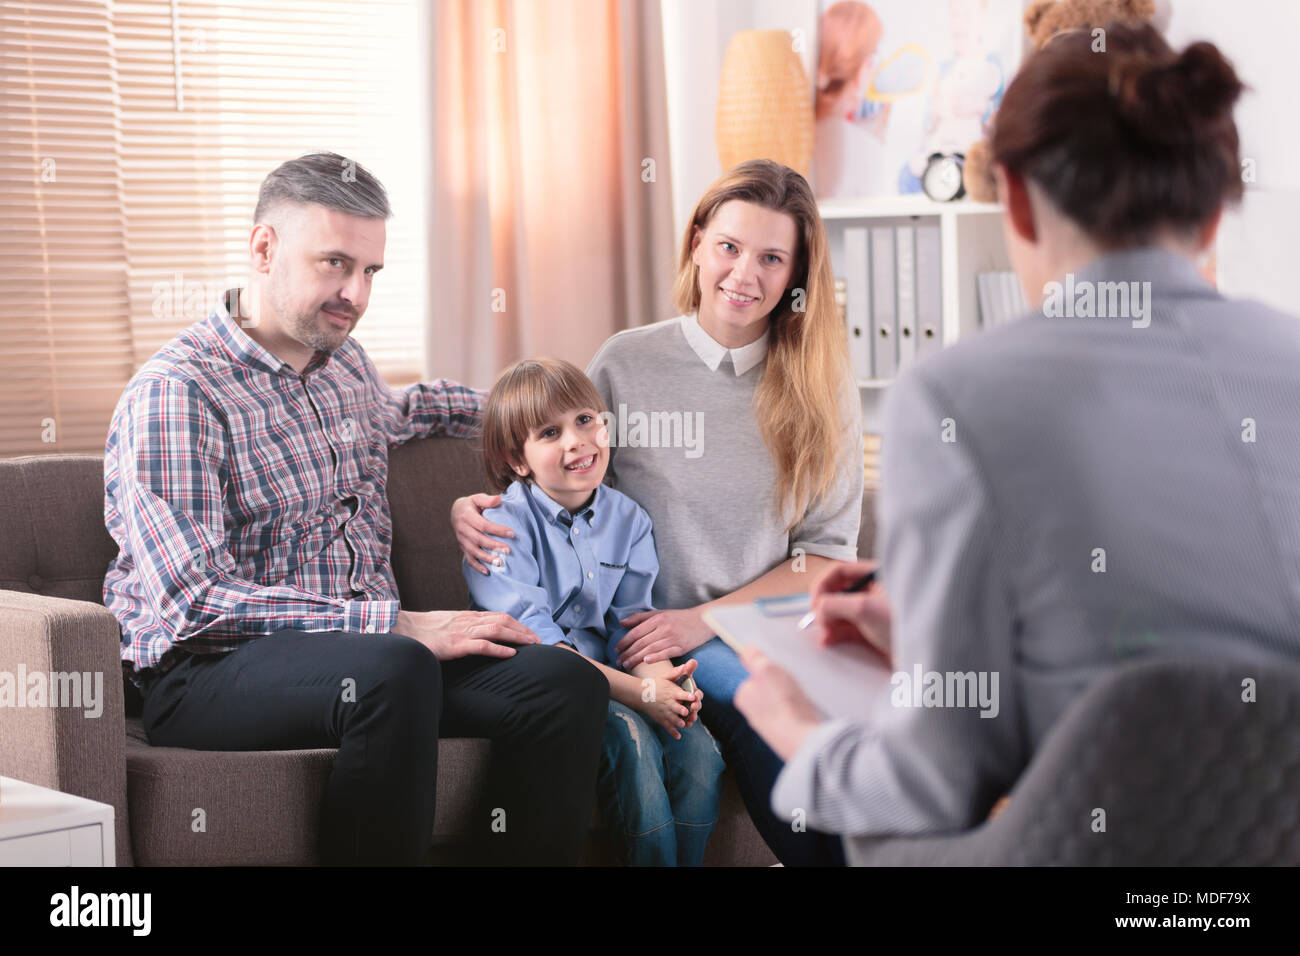 Smiling son with his happy parents during a consultation with advisor Stock Photo